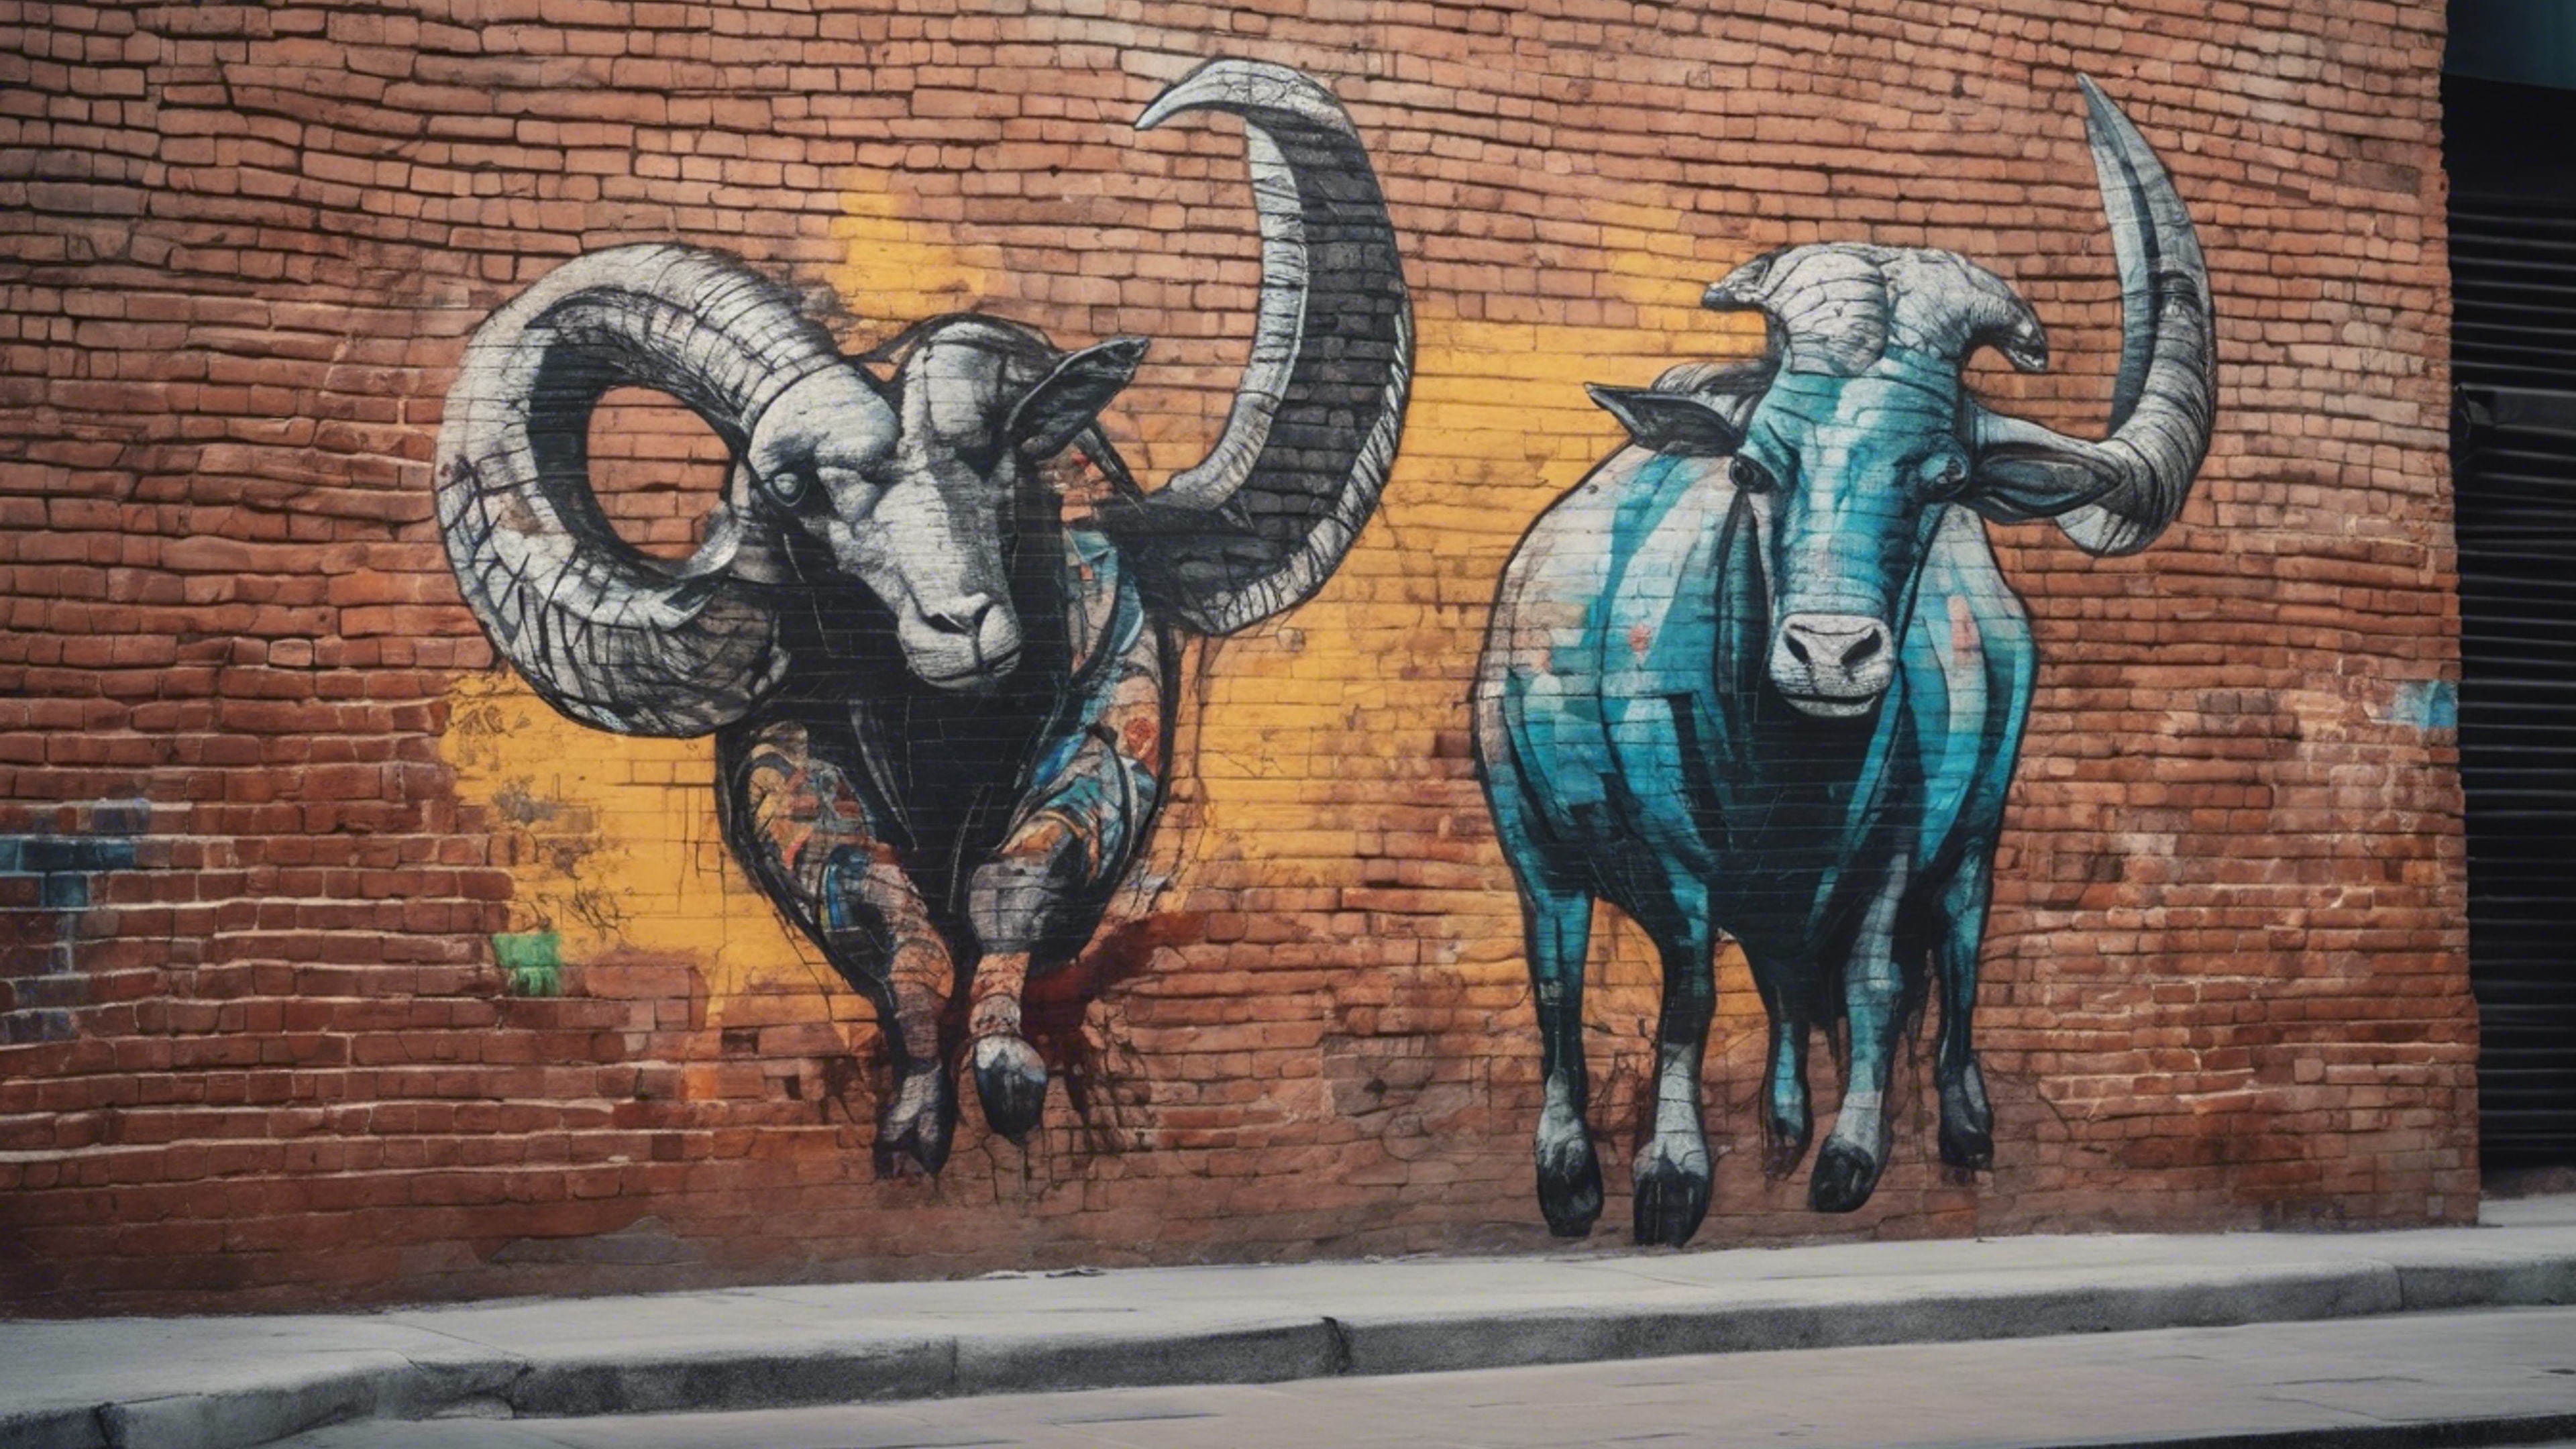 A Capricorn painted as street art on a brick wall in a busy city street. Тапет[8124c45194ee4830b5c7]